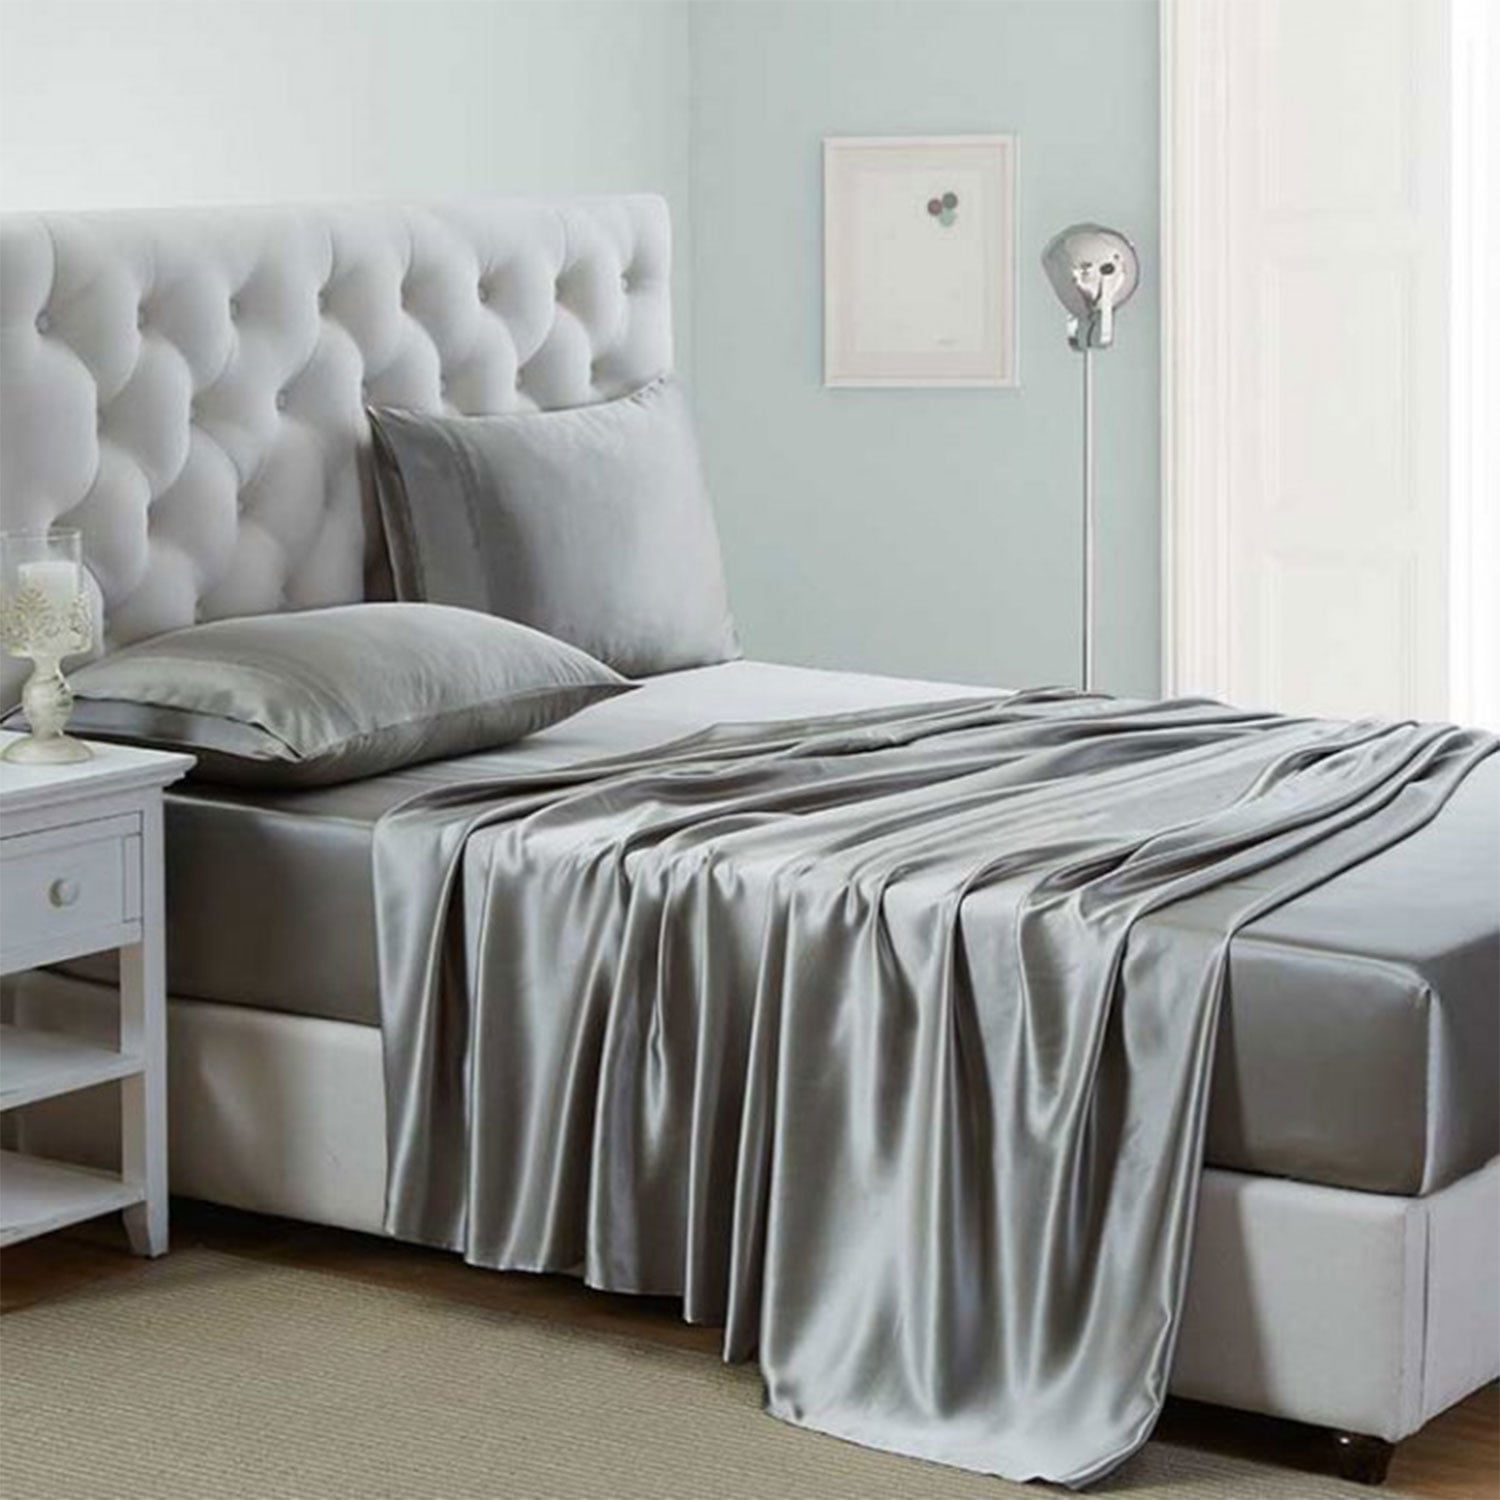 Elegant Silk Bed Sheets for a Luxurious Bedroom